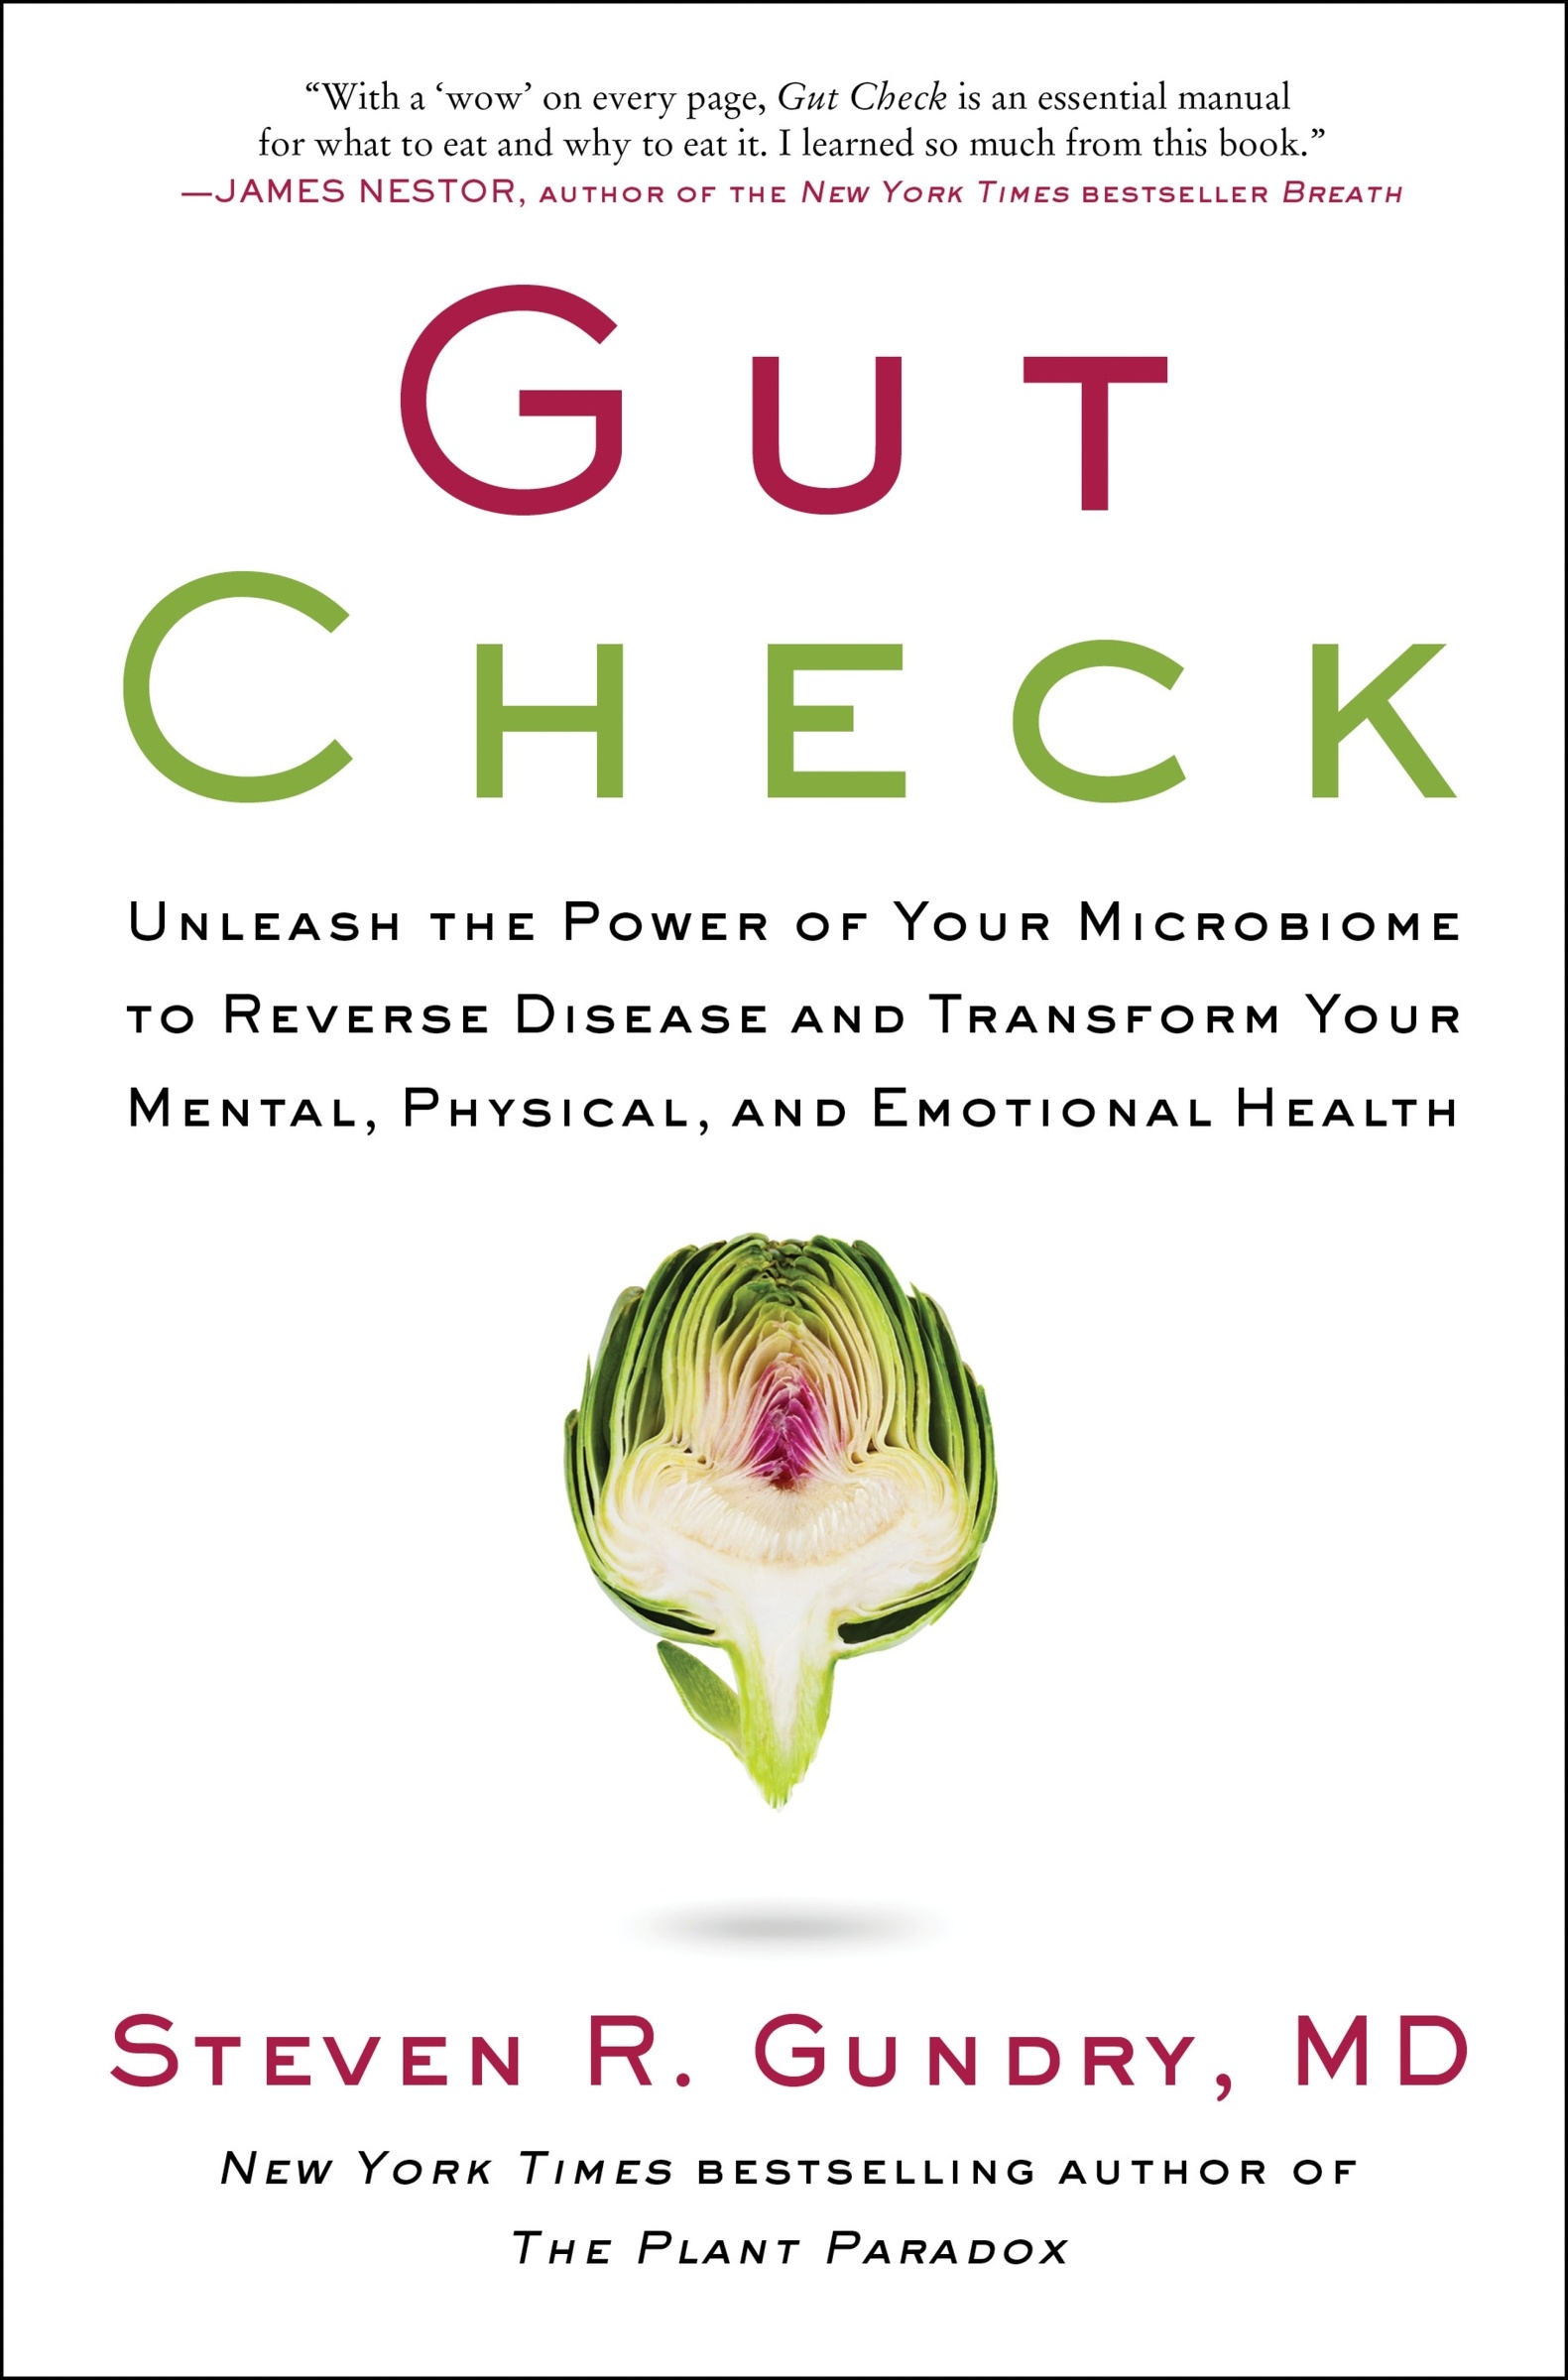 Gut Check Unleash the Power of Your Microbiome to Reverse Disease and Transform Your Mental, Physical, and Emotional Health cover image